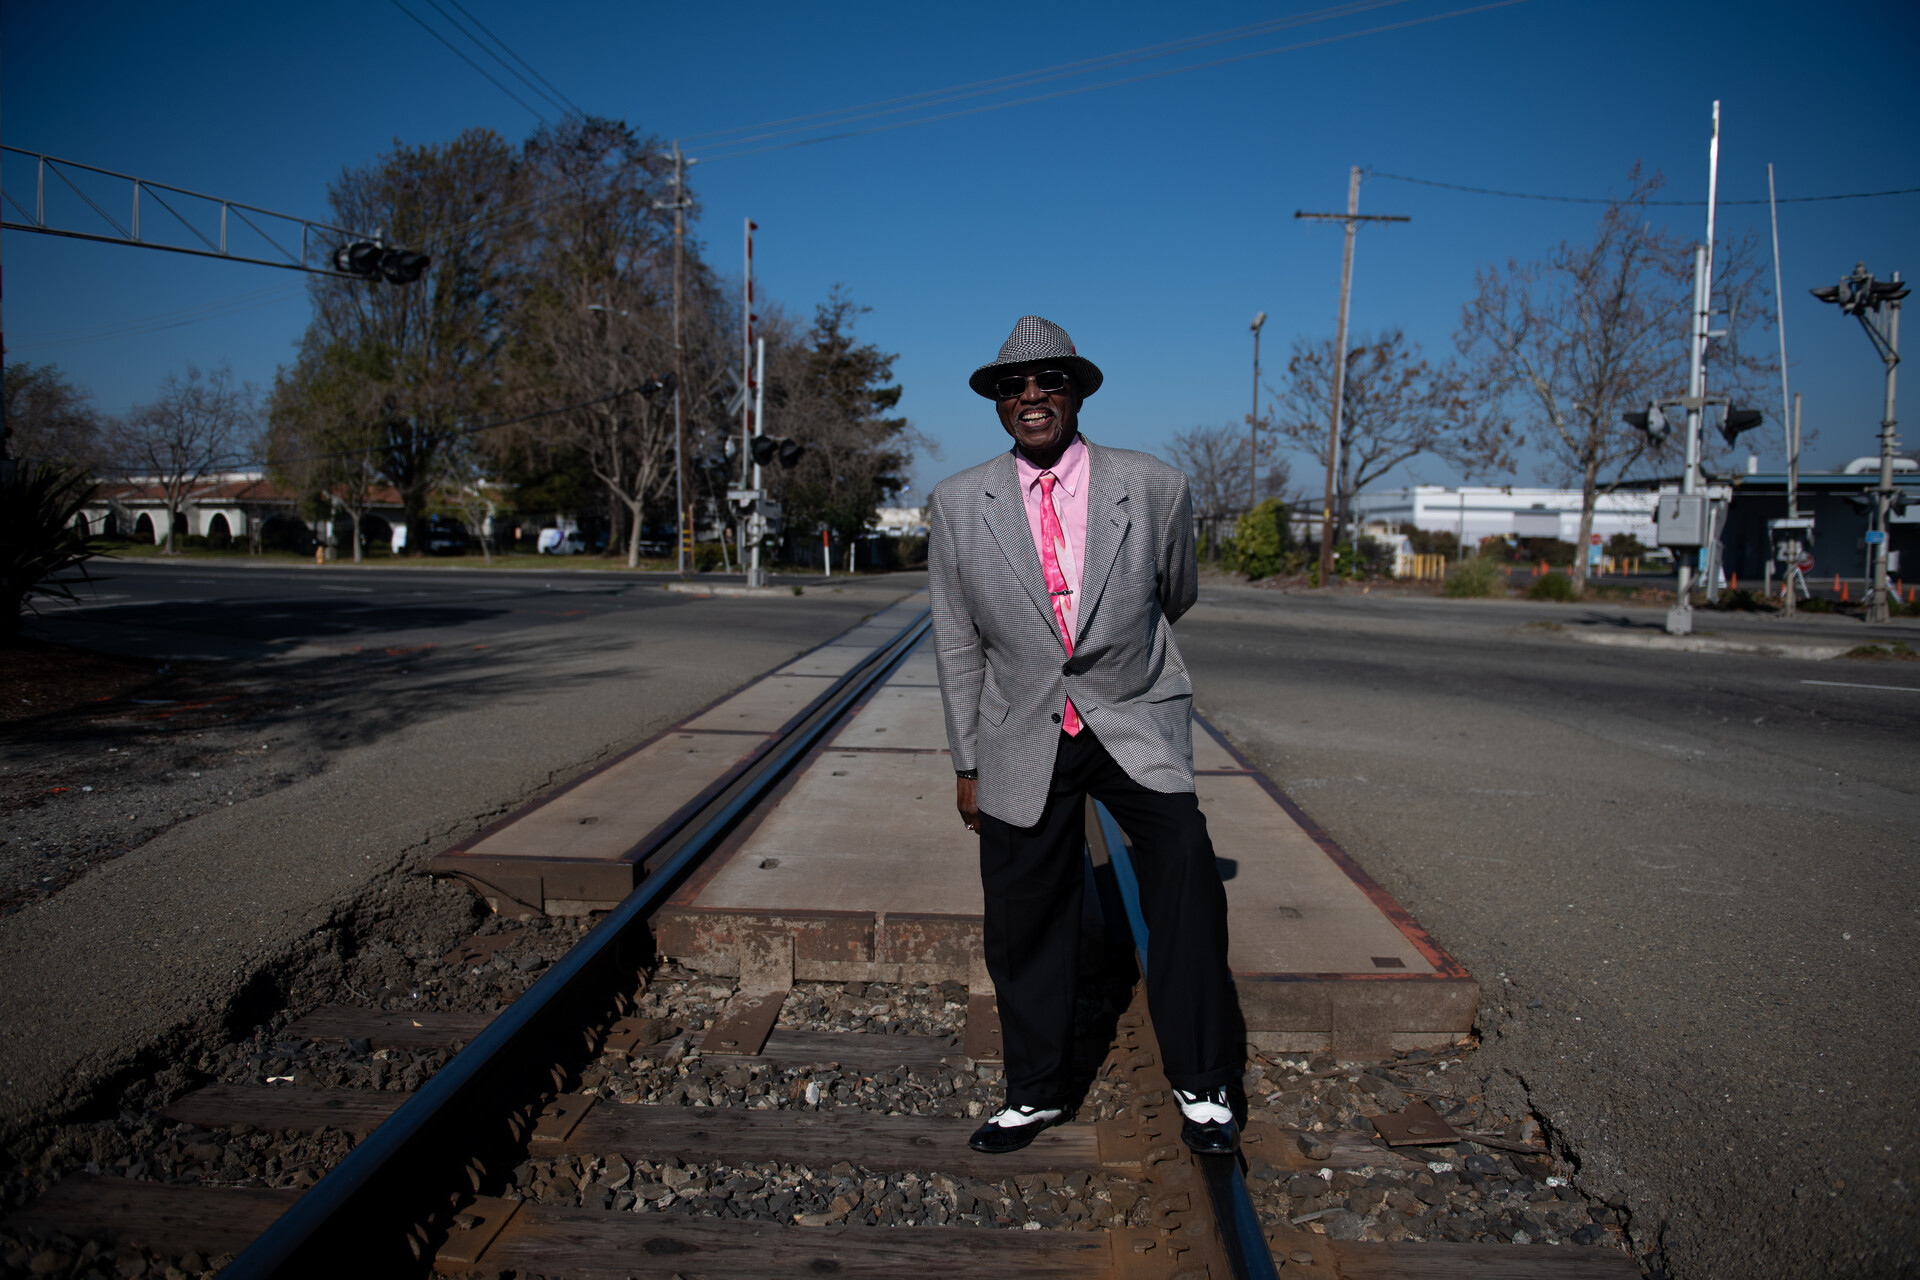 A Black man stands in the middle of the railroad tracks wearing a stylish suit jacket with pink shirt and tie, fedora, and black and white shoes.